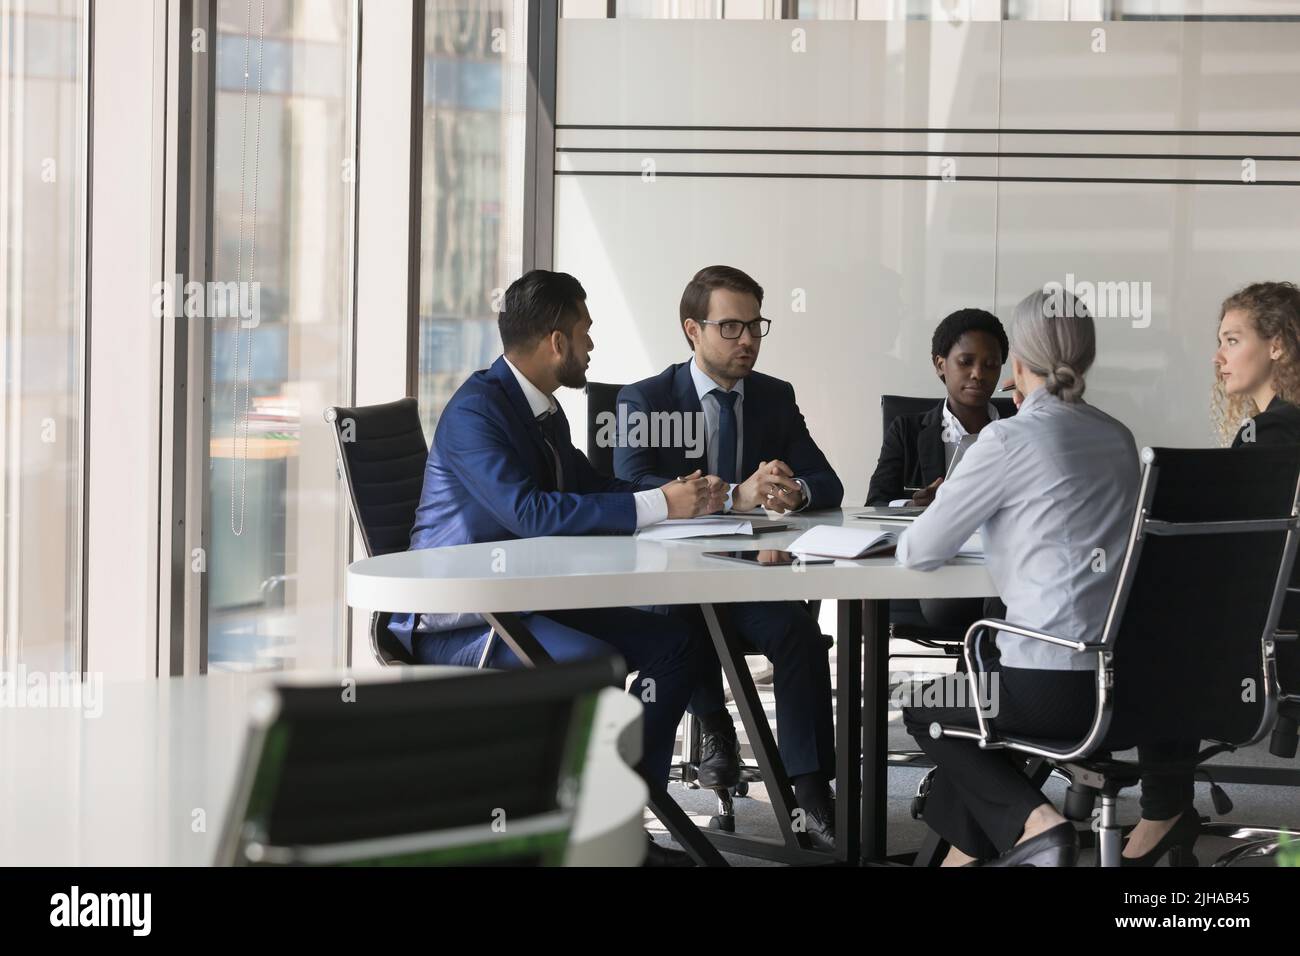 Serious diverse group of business coworkers collaborating on project Stock Photo